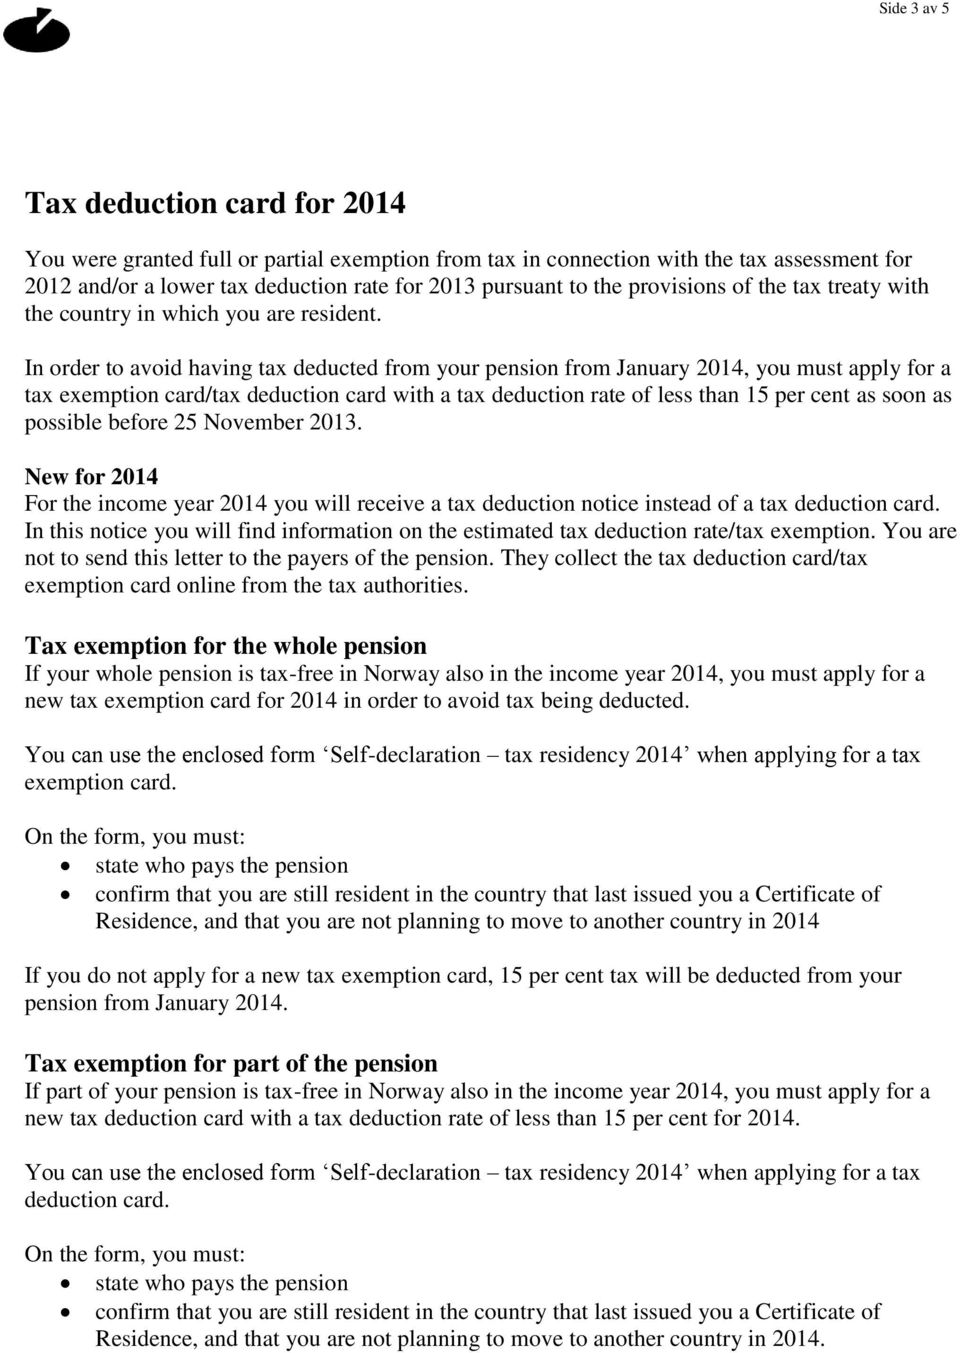 In order to avoid having tax deducted from your pension from January 2014, you must apply for a tax exemption card/tax deduction card with a tax deduction rate of less than 15 per cent as soon as